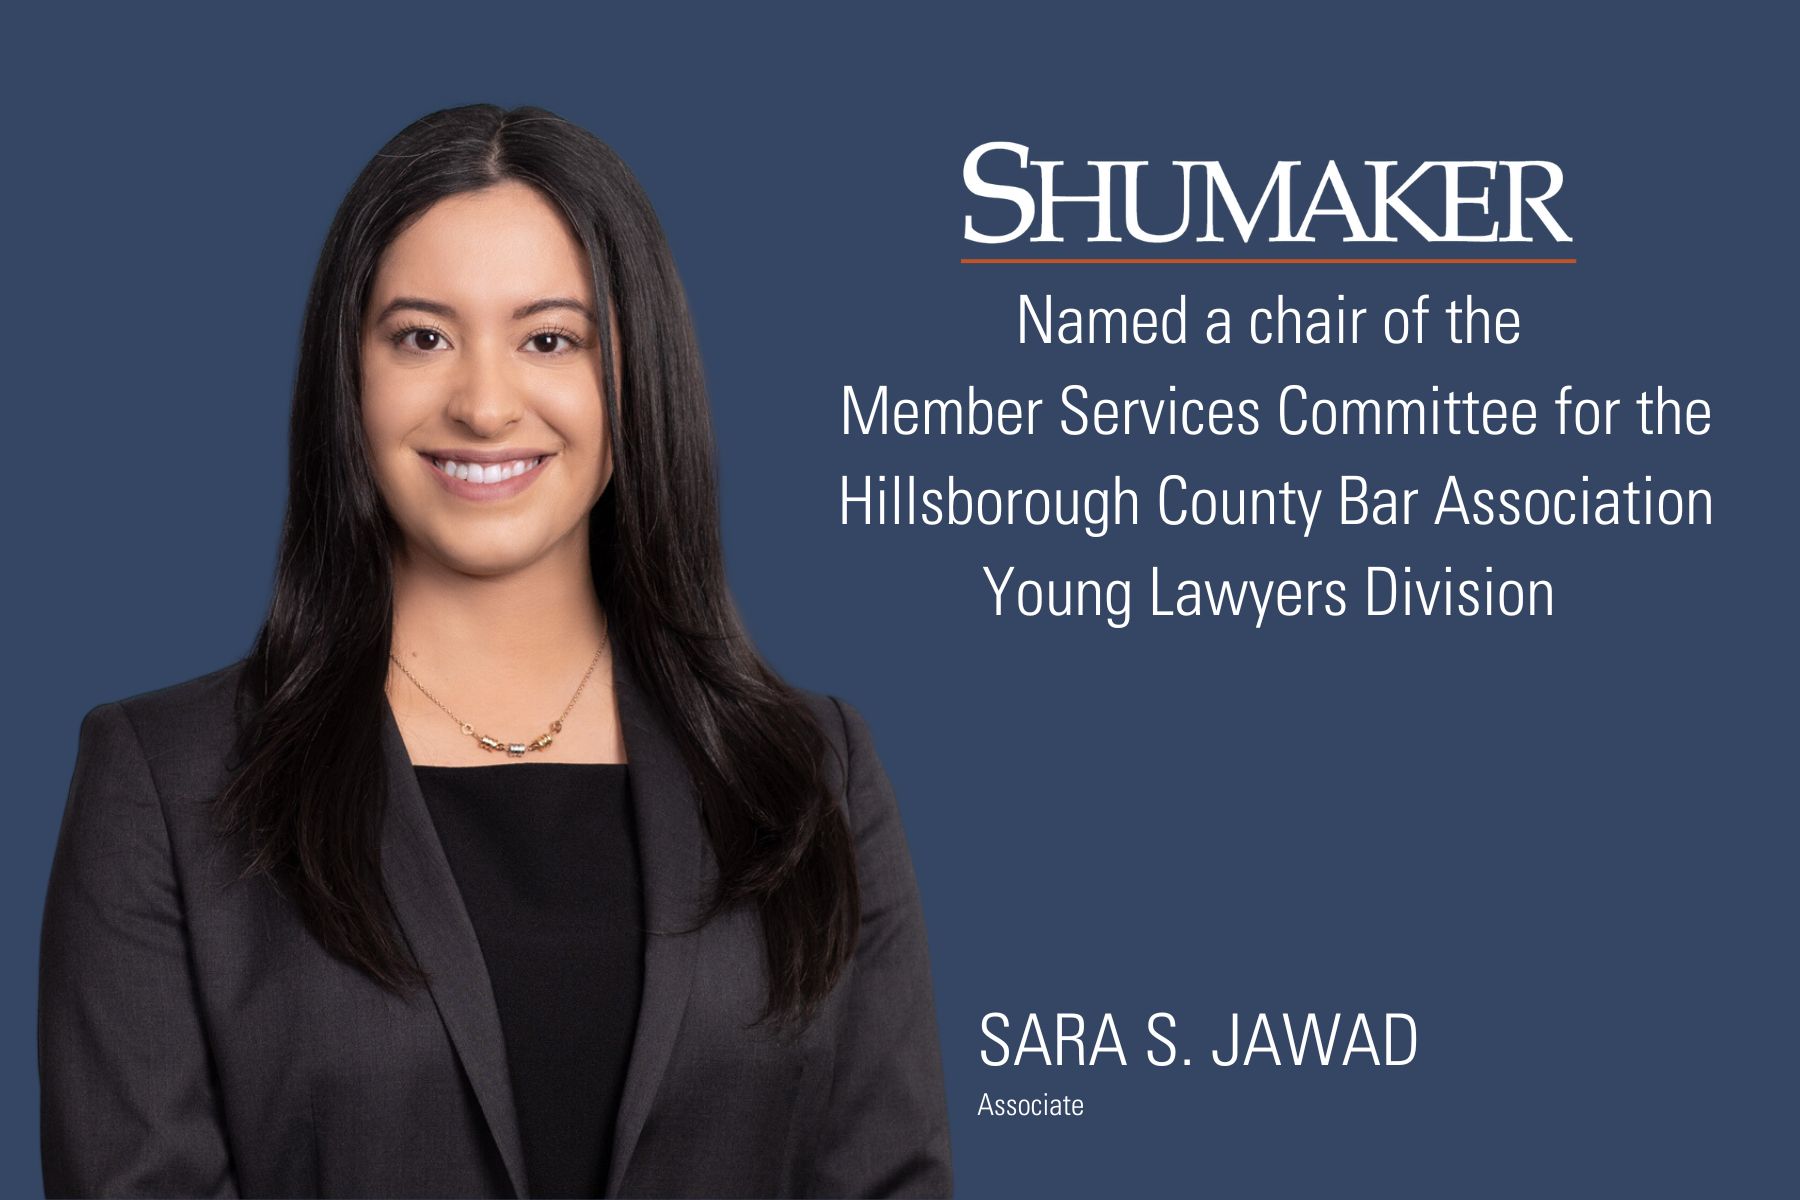 Sara S. Jawad Appointed to Leadership Role for Hillsborough County Bar Association Young Lawyers Division